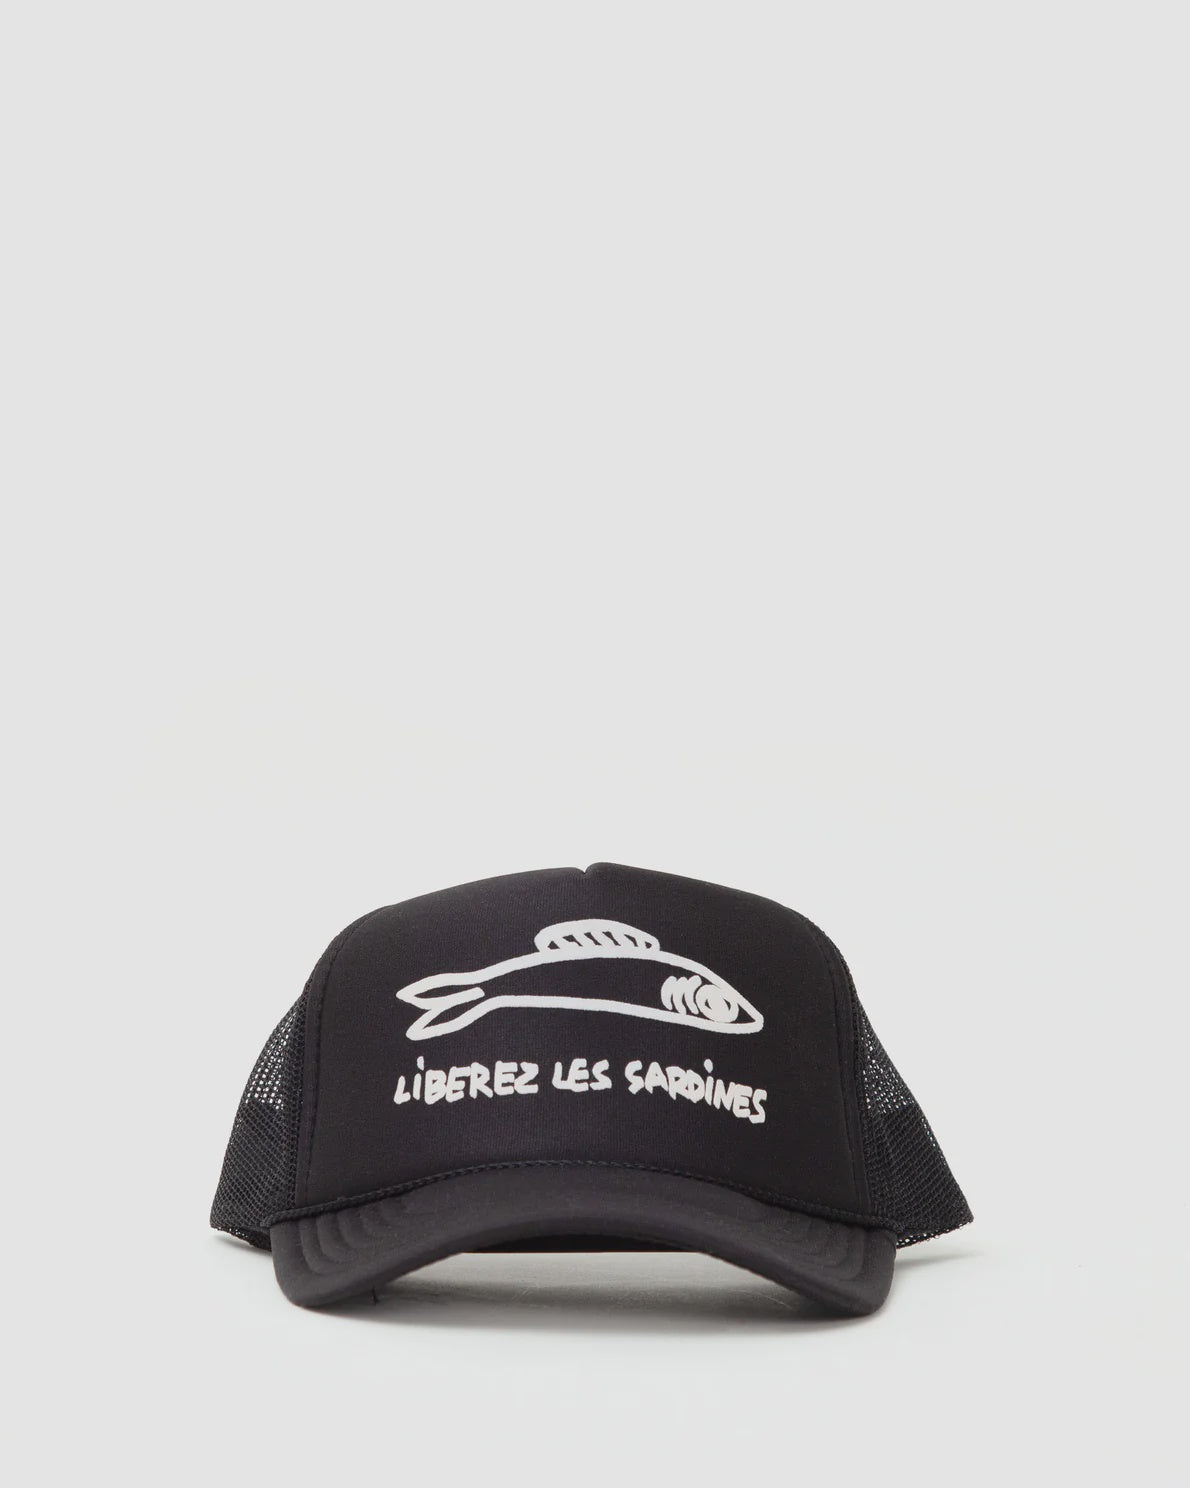 A black Trucker Hat Liberez Les Sardines BLACK by Clare Vivier with a white fish graphic on the front panel. Below the fish, the text "LIBEREZ LES SARDINES" is written in white. This unisex accessory features a mesh back, making it both stylish and practical. The background is plain and light-colored.